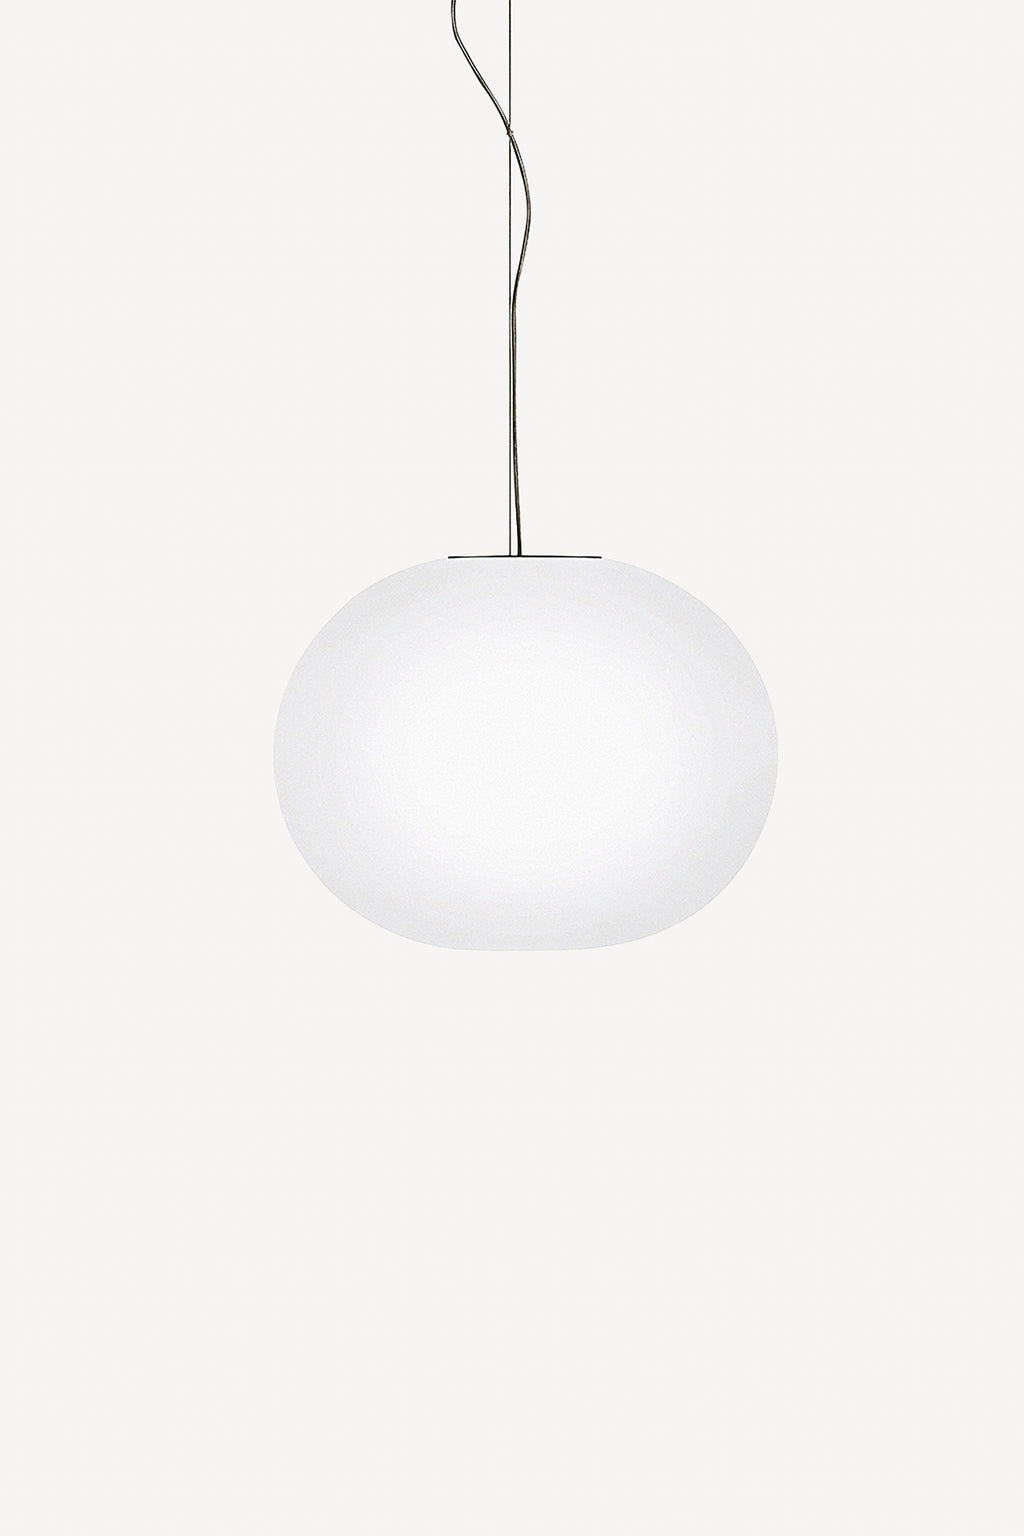 Glo-Ball Suspended Pendant, large – Hygge